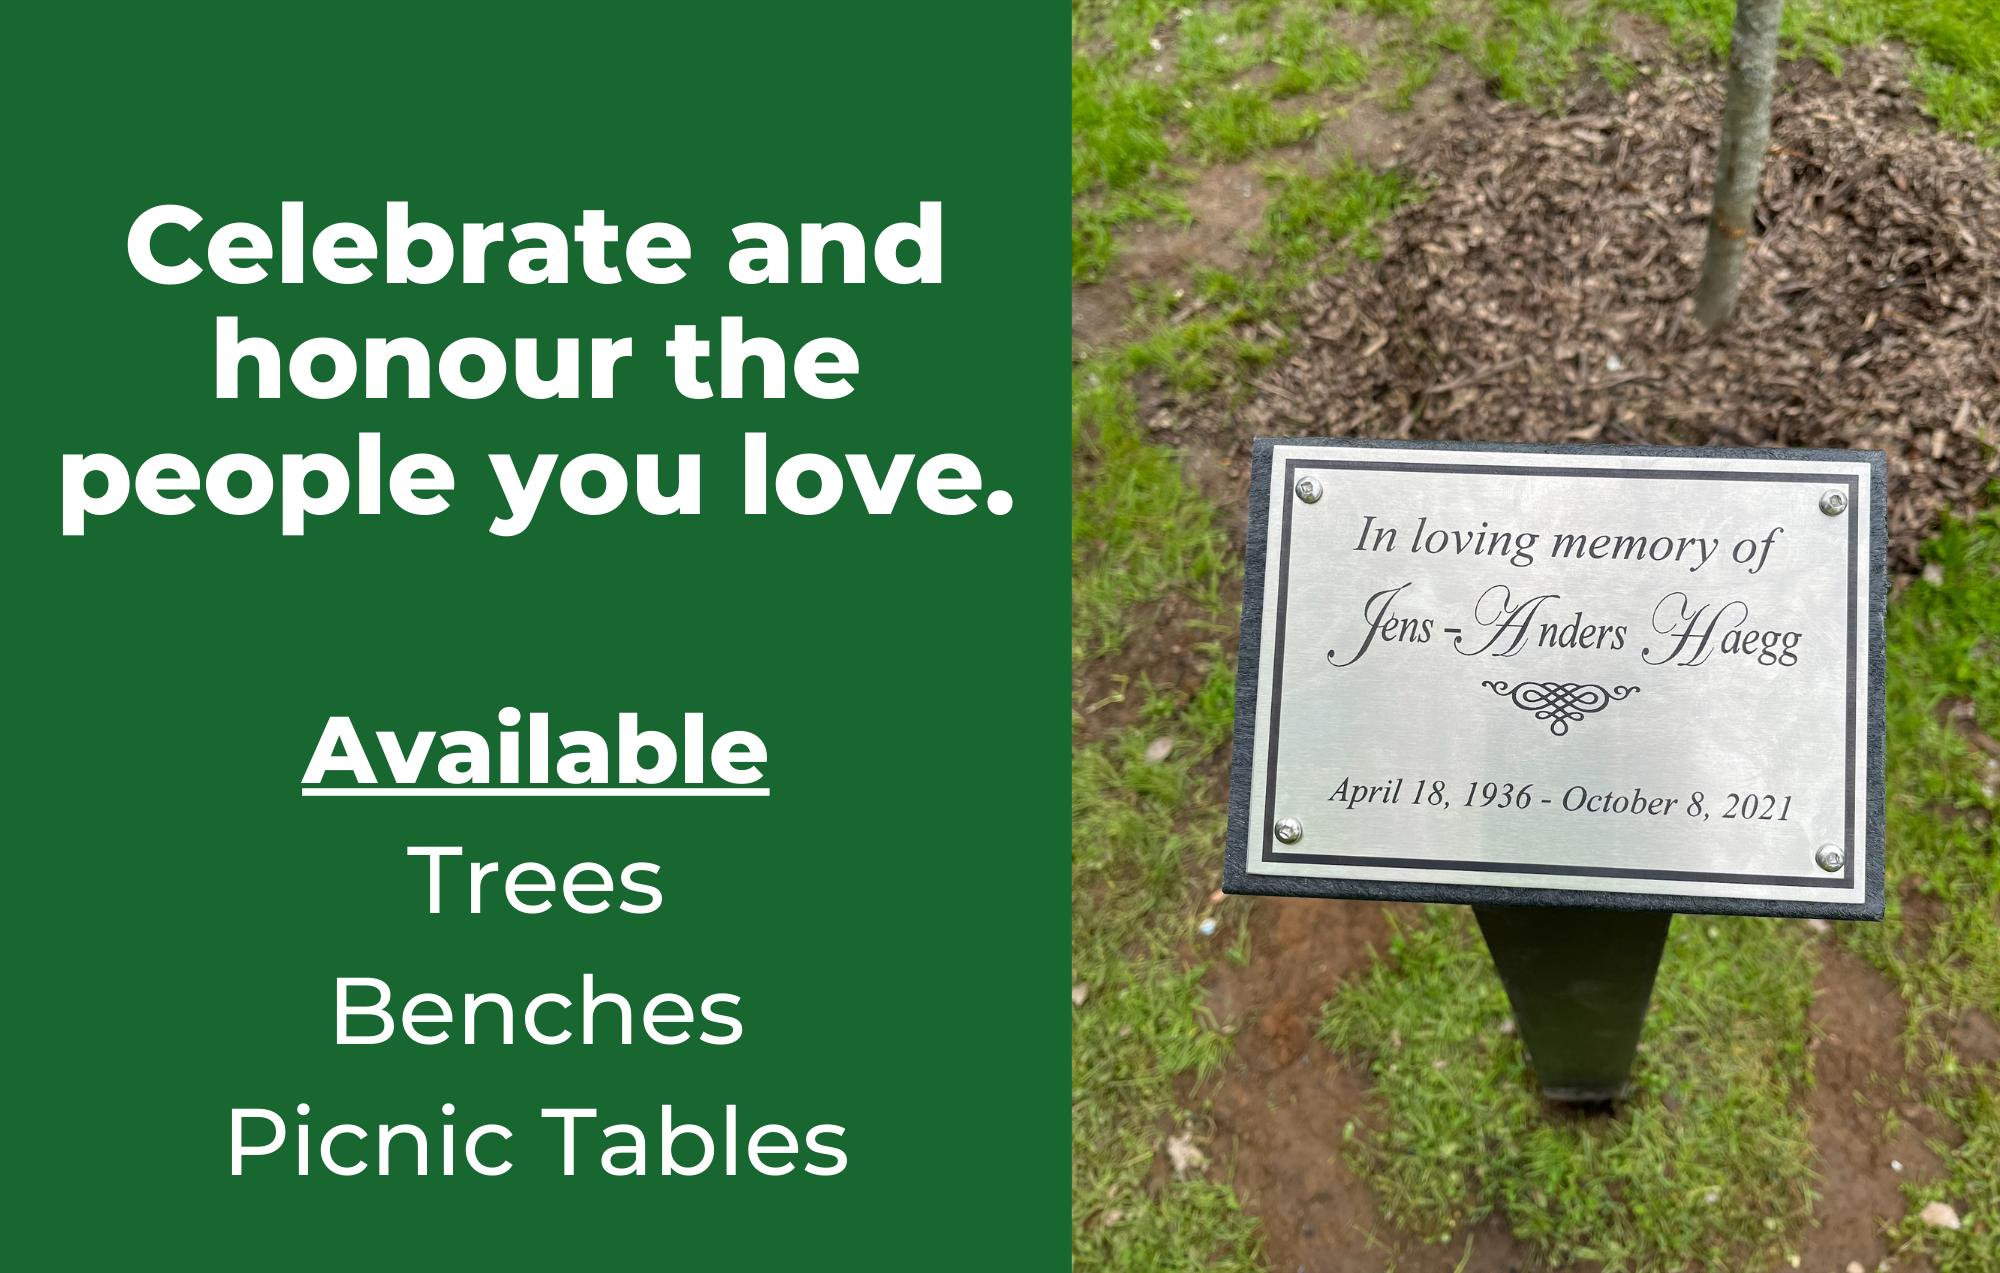 Image of memorial plaque with text overlay that reads: Celebrate and honour the people you love. Trees, benches and picnic tables available.